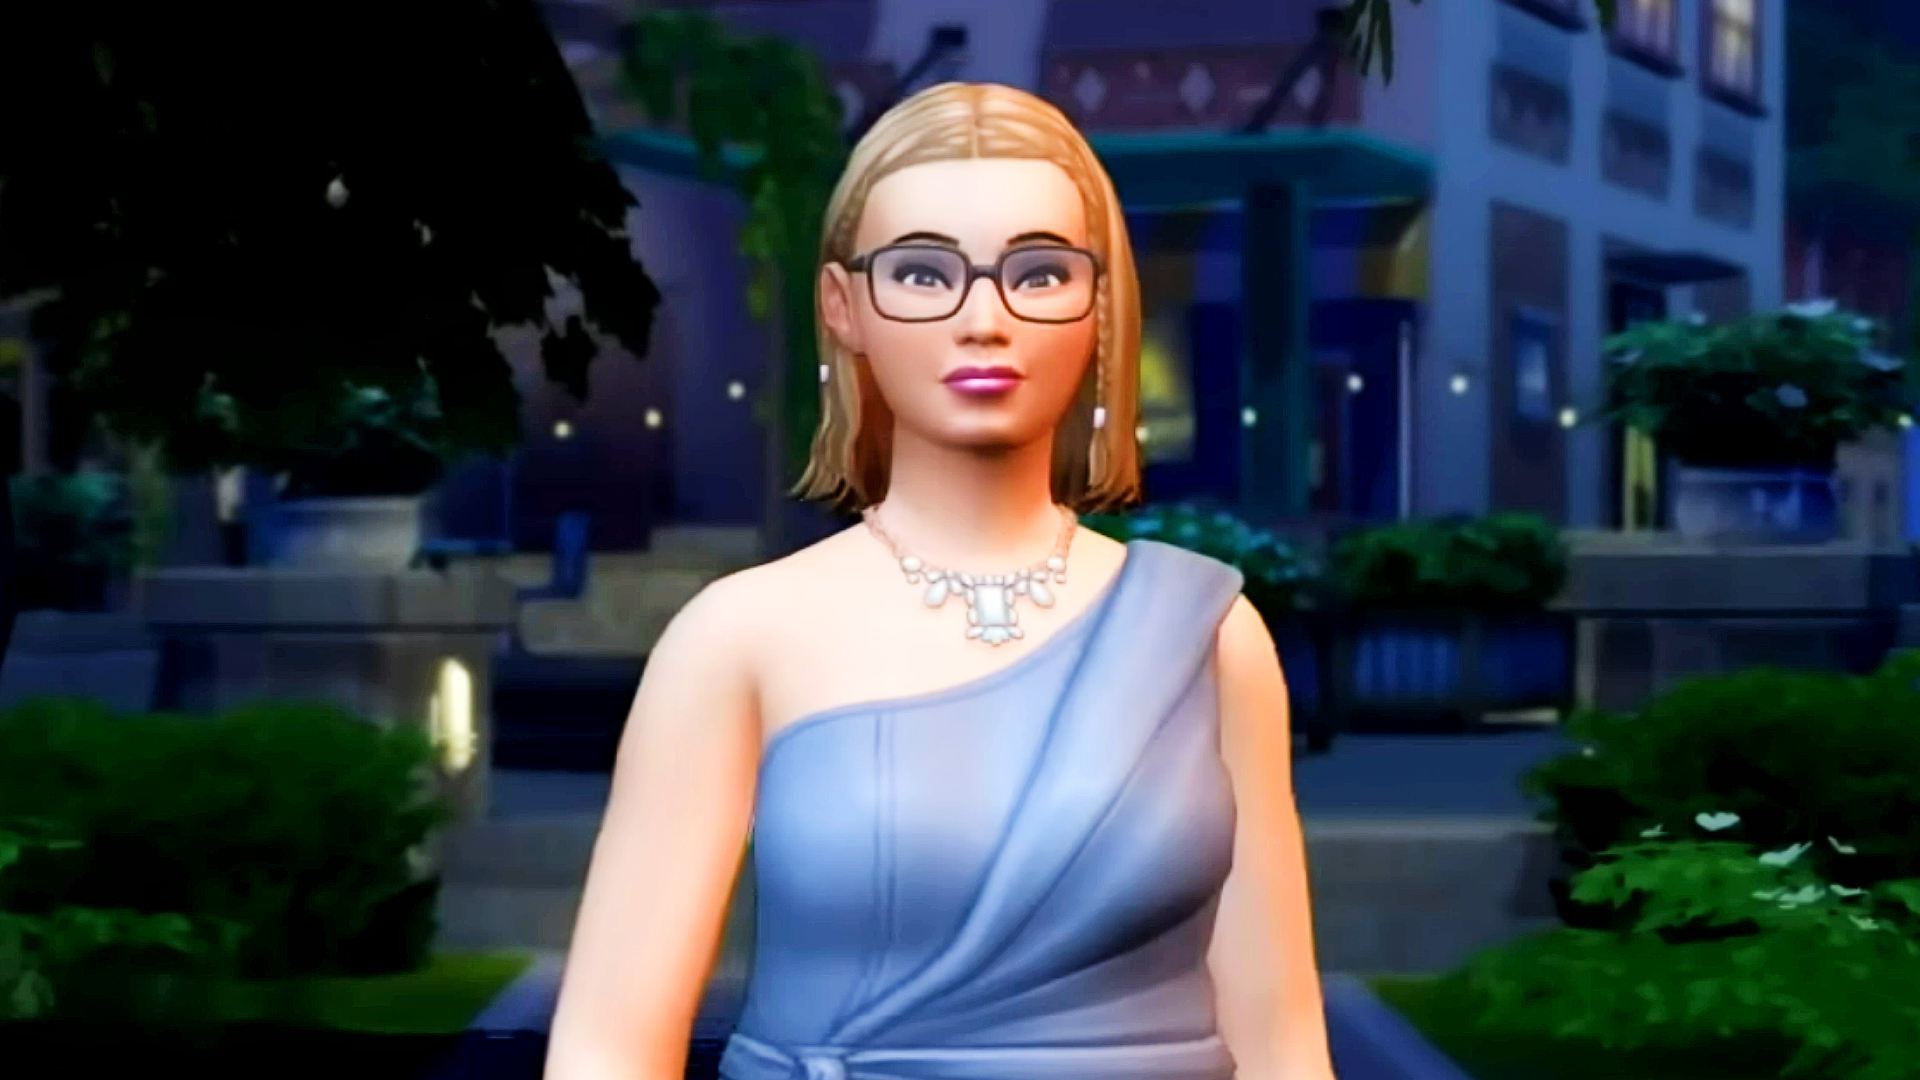 20 of the best Sims 4 mods